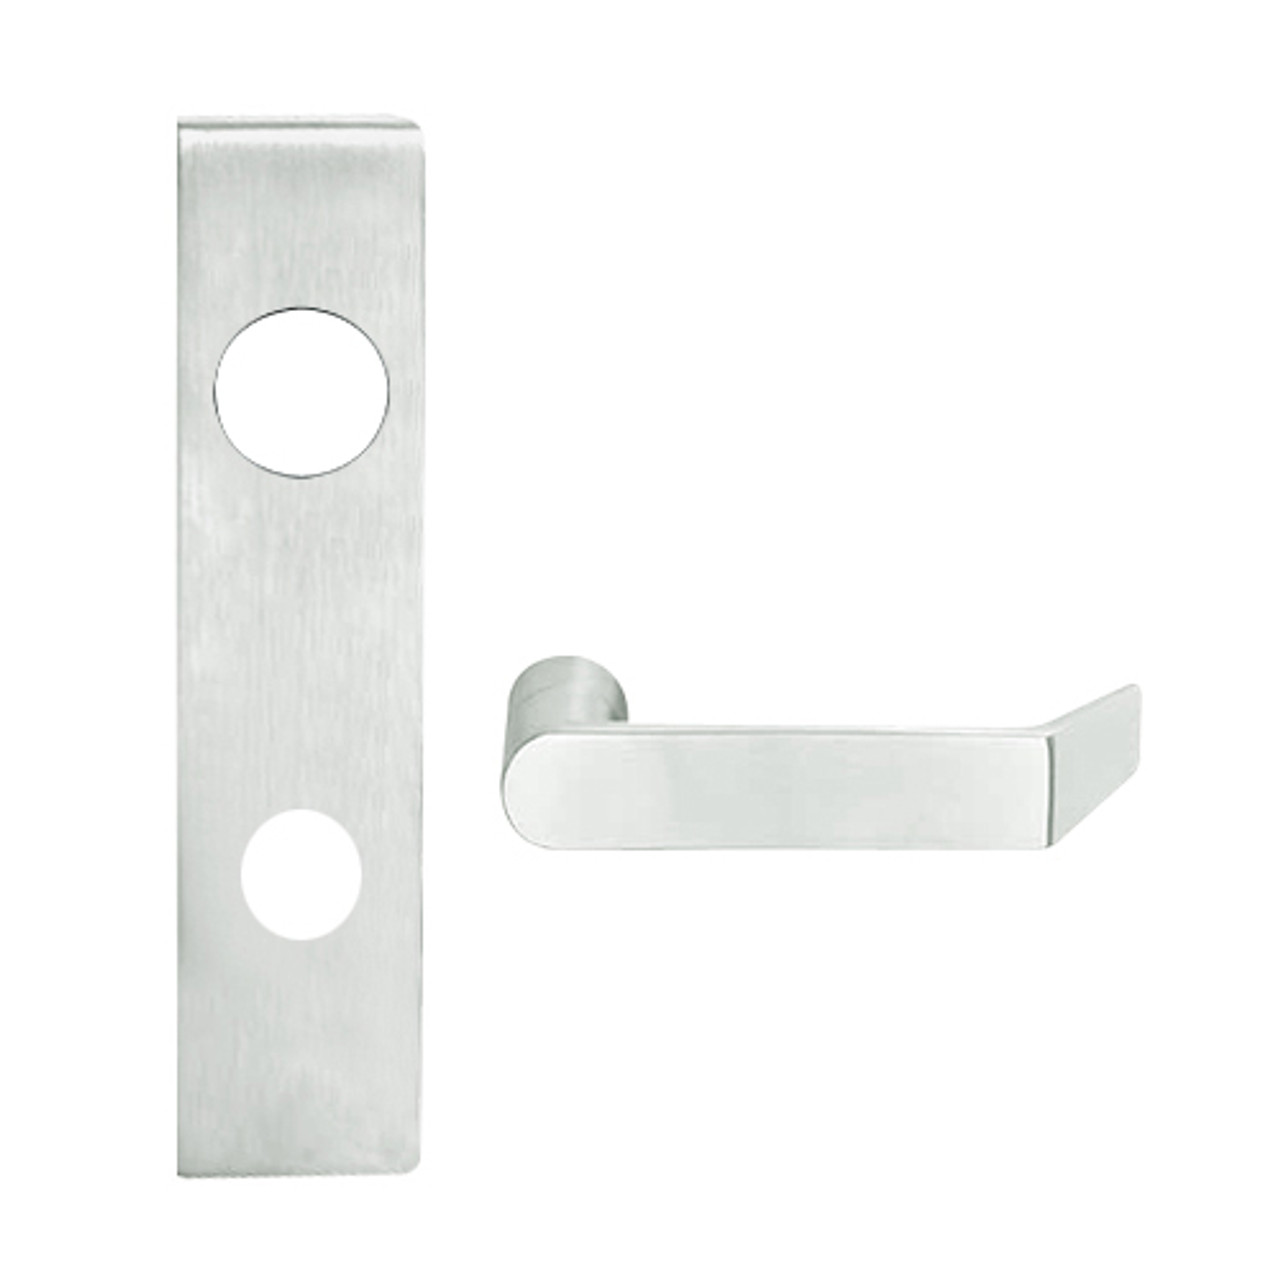 L9050J-06L-619 Schlage L Series Entrance Commercial Mortise Lock with 06 Cast Lever Design Prepped for FSIC in Satin Nickel